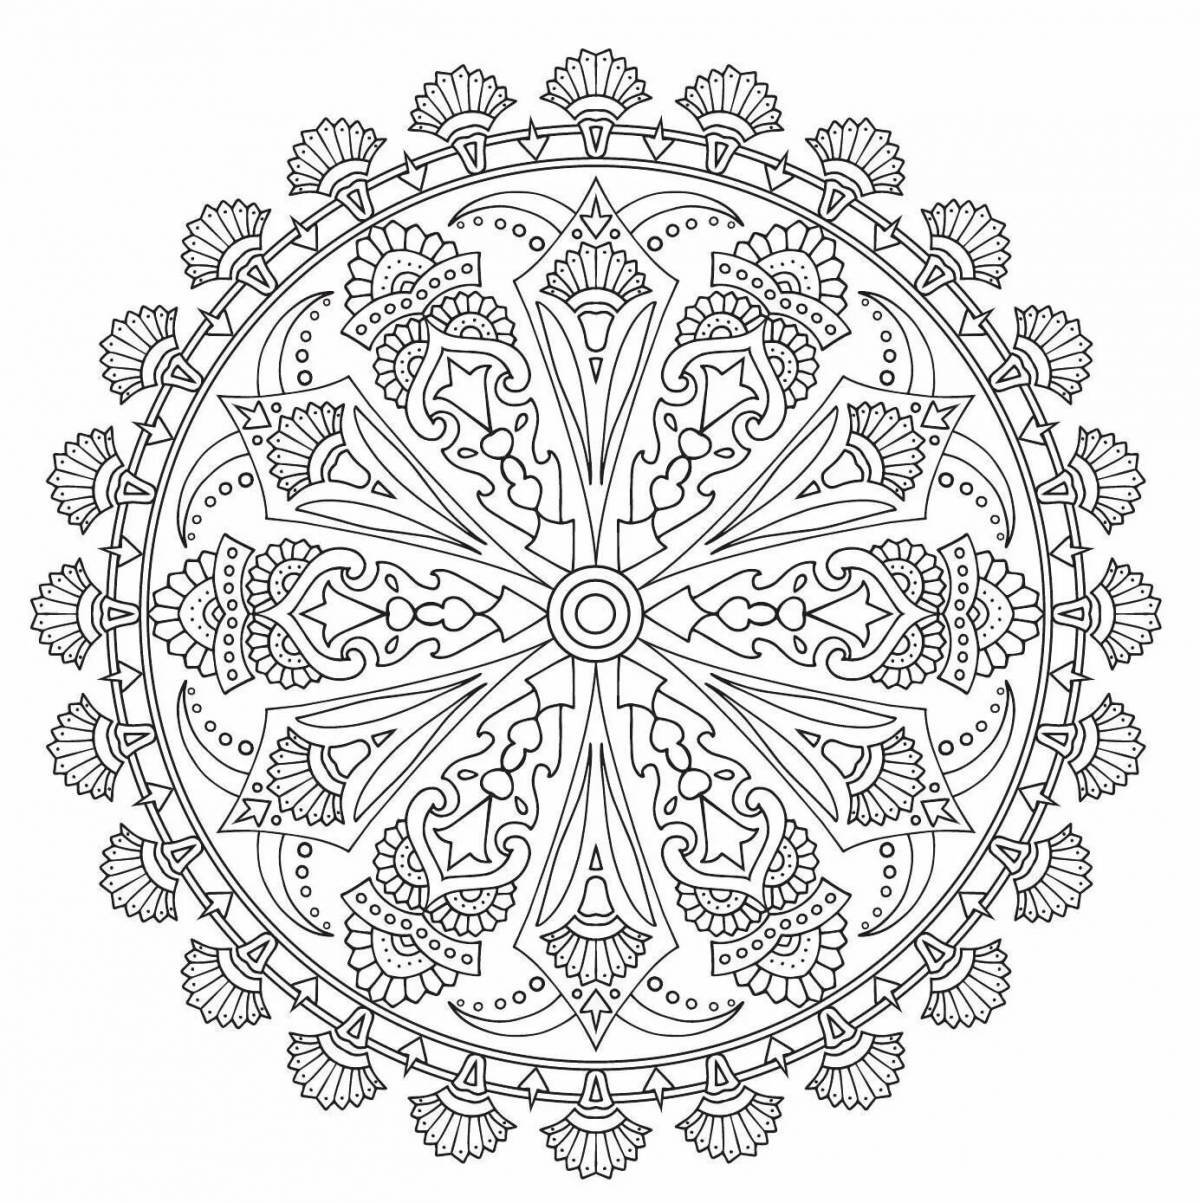 Glitter coloring mandala for victory and achievement